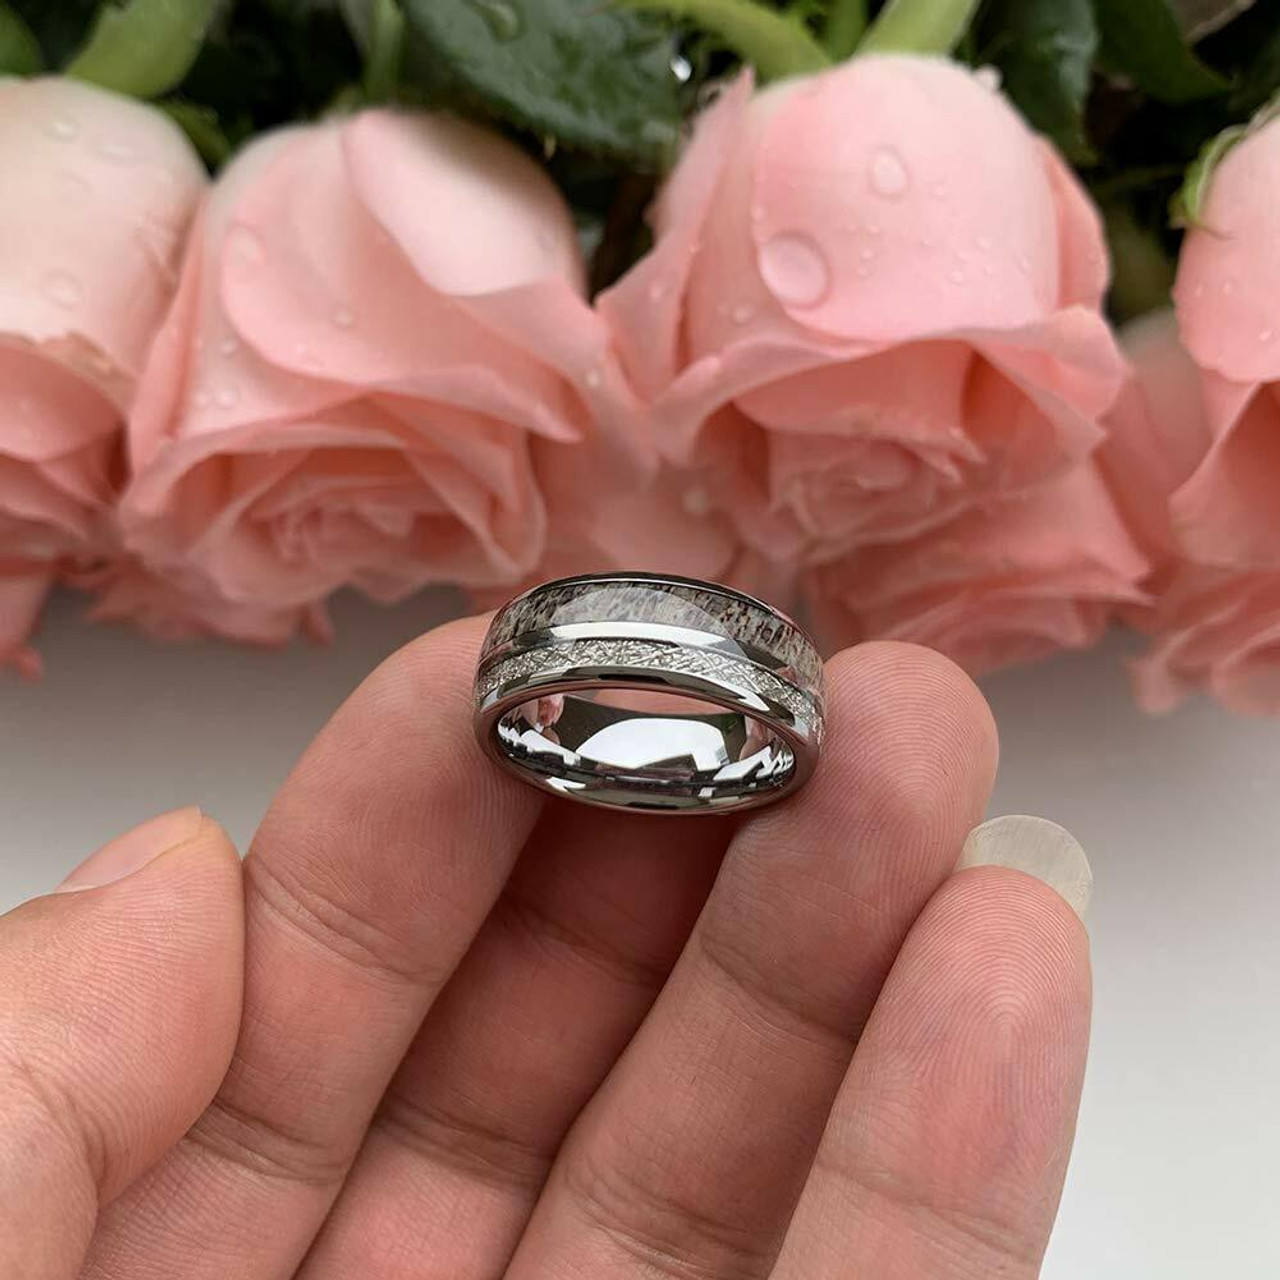 Women's or Men's Tungsten Steel Wedding Band Ring (8mm). Silver with White Antler and Inspired Meteorite Inlay. Domed Top and Comfort Fit